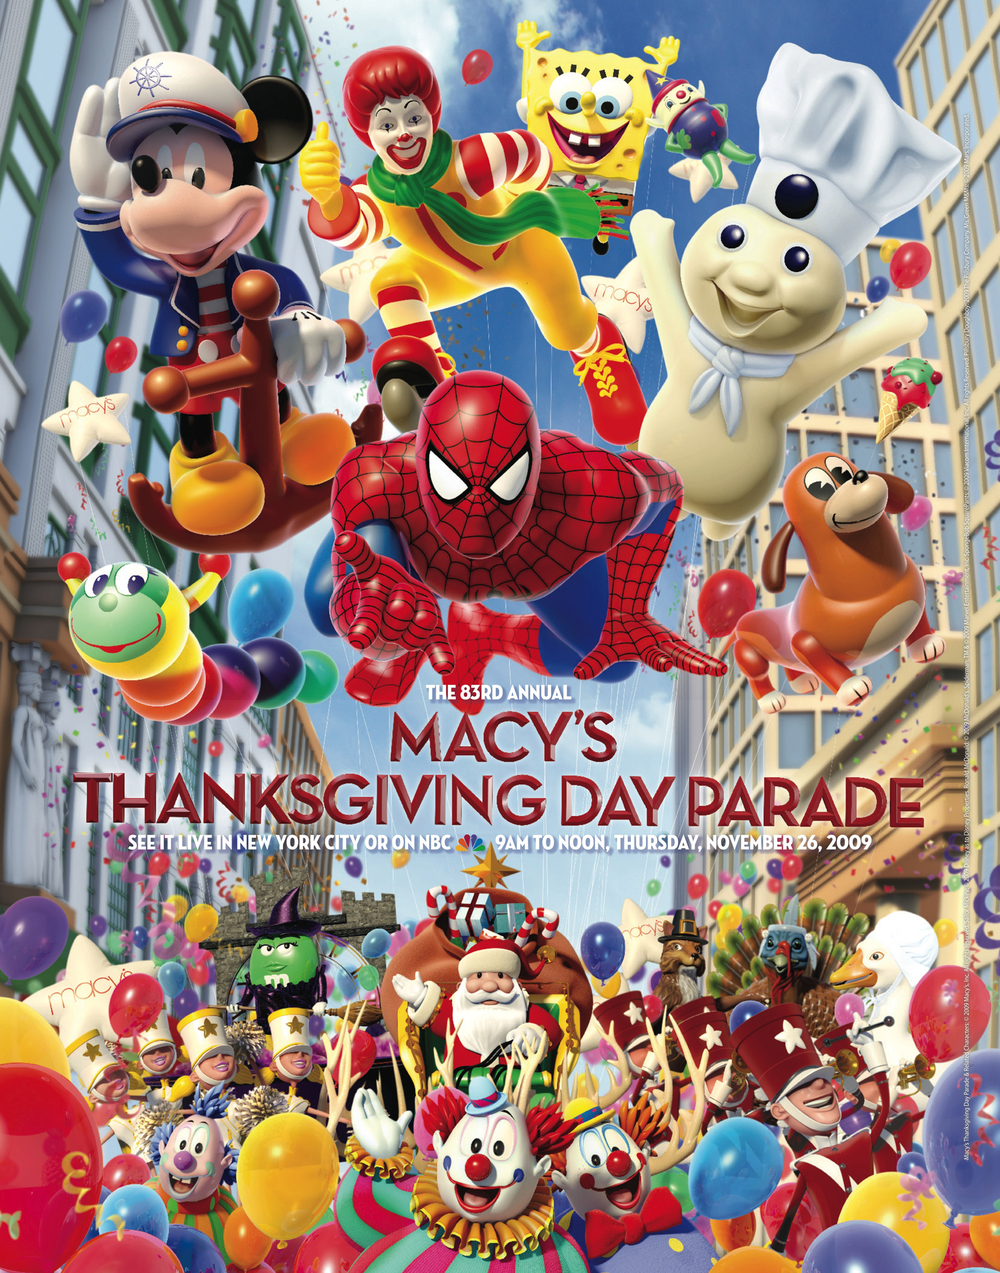 The 83rd Annual Macy's Thanksgiving Day Parade (2009) Macy's